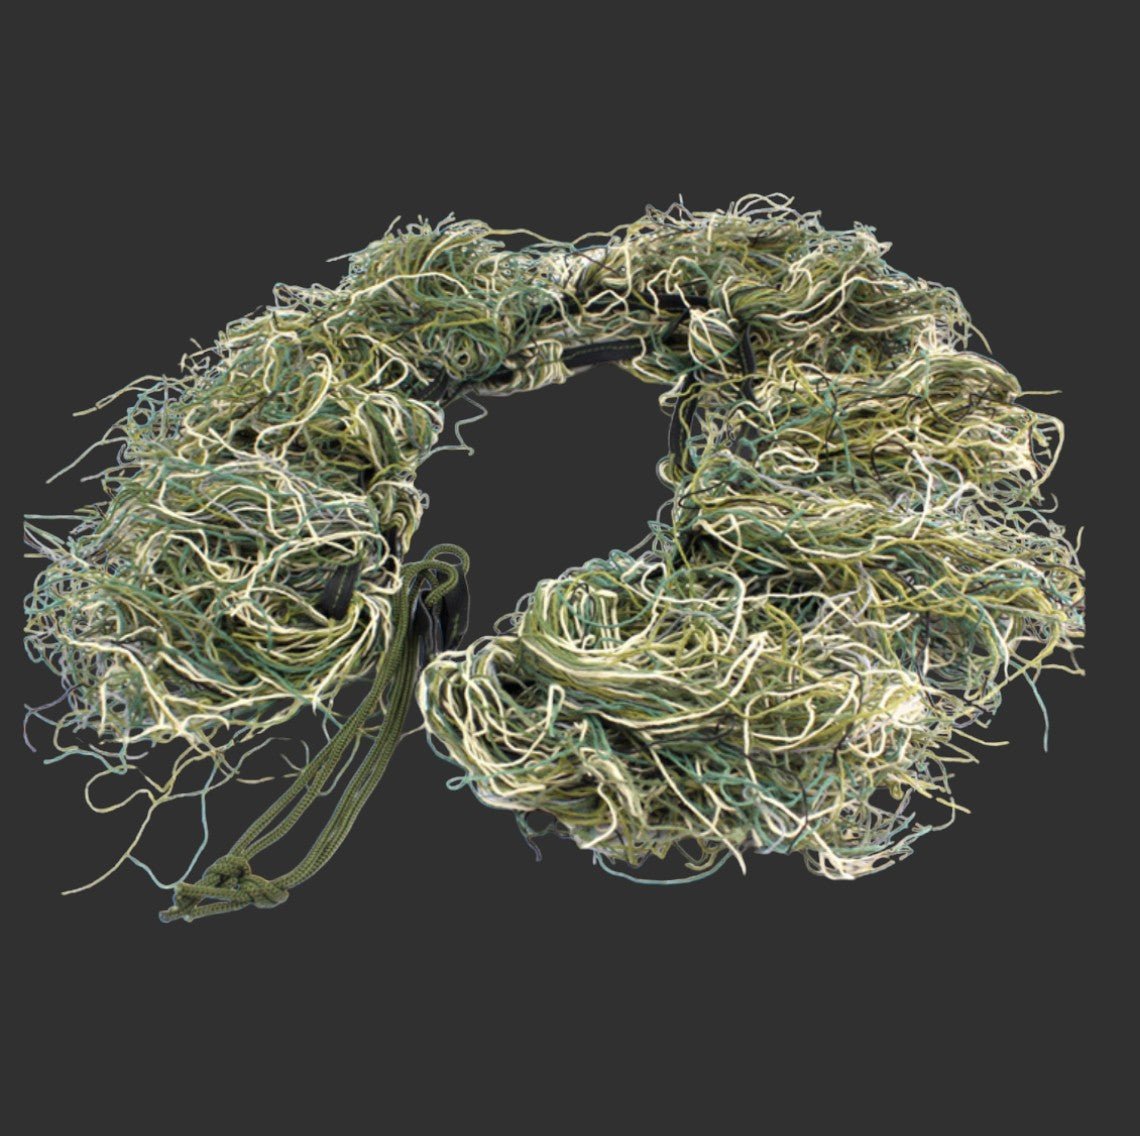 A StealthGuard Gun Cover by BlasterMasters, a coil of tangled green, tan, and white strings resembling camouflage, is placed against a dark gray background.